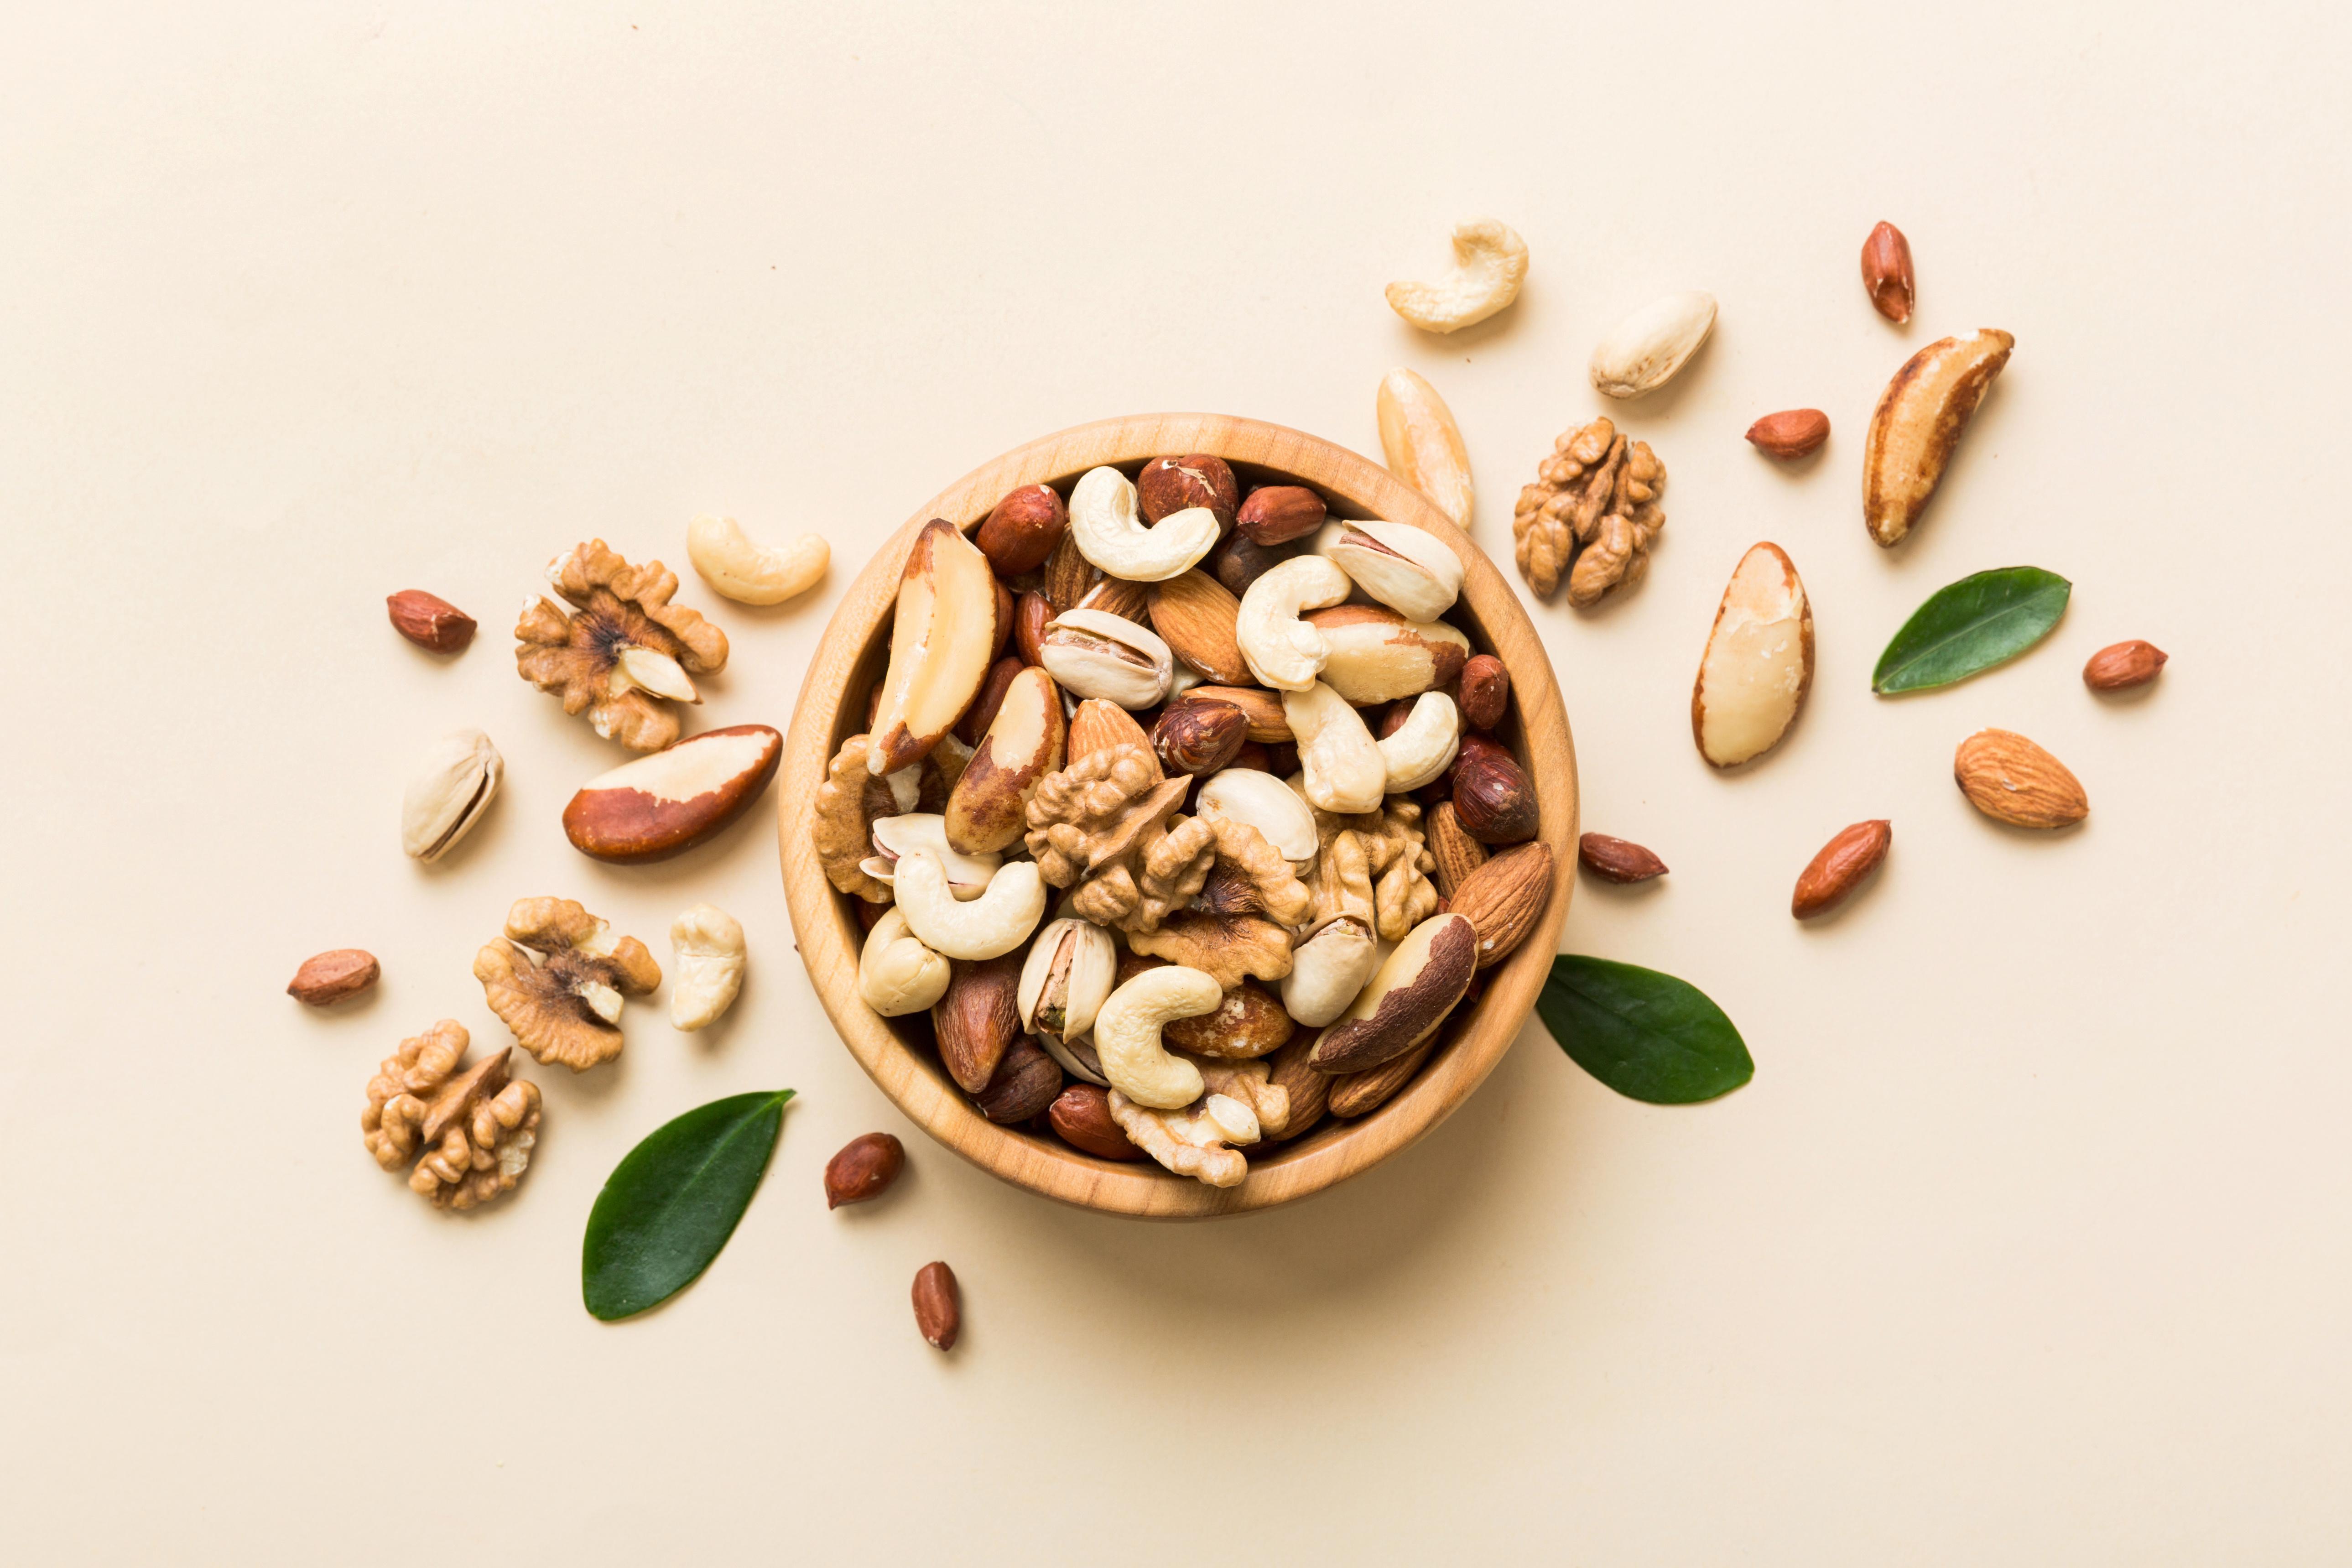 a bowl of nuts on a counter anti inflammatory gut bacteria gut microbiome diversity